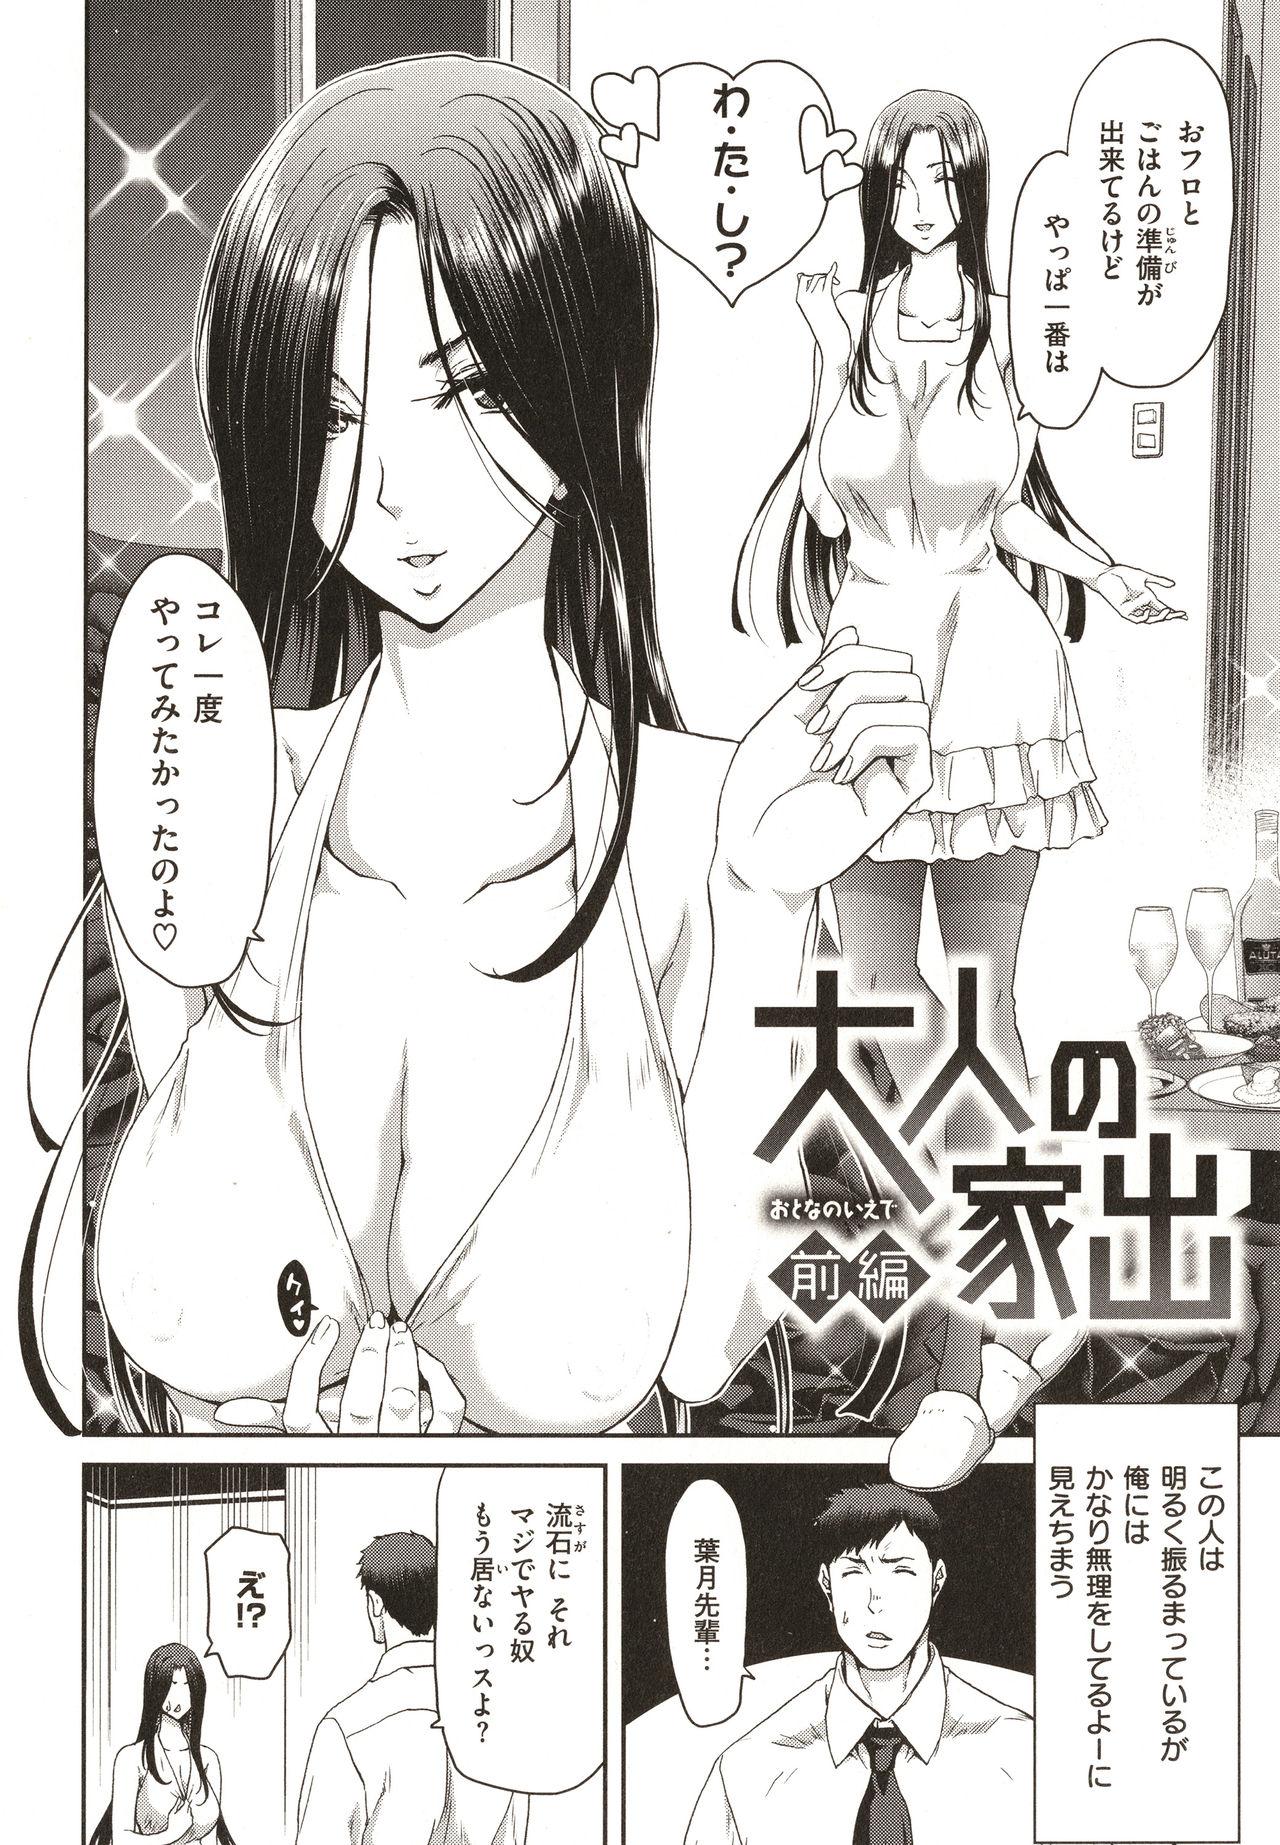 Alone Iede Onna o Hirottara - When I picked up a runaway girl. Highschool - Page 6